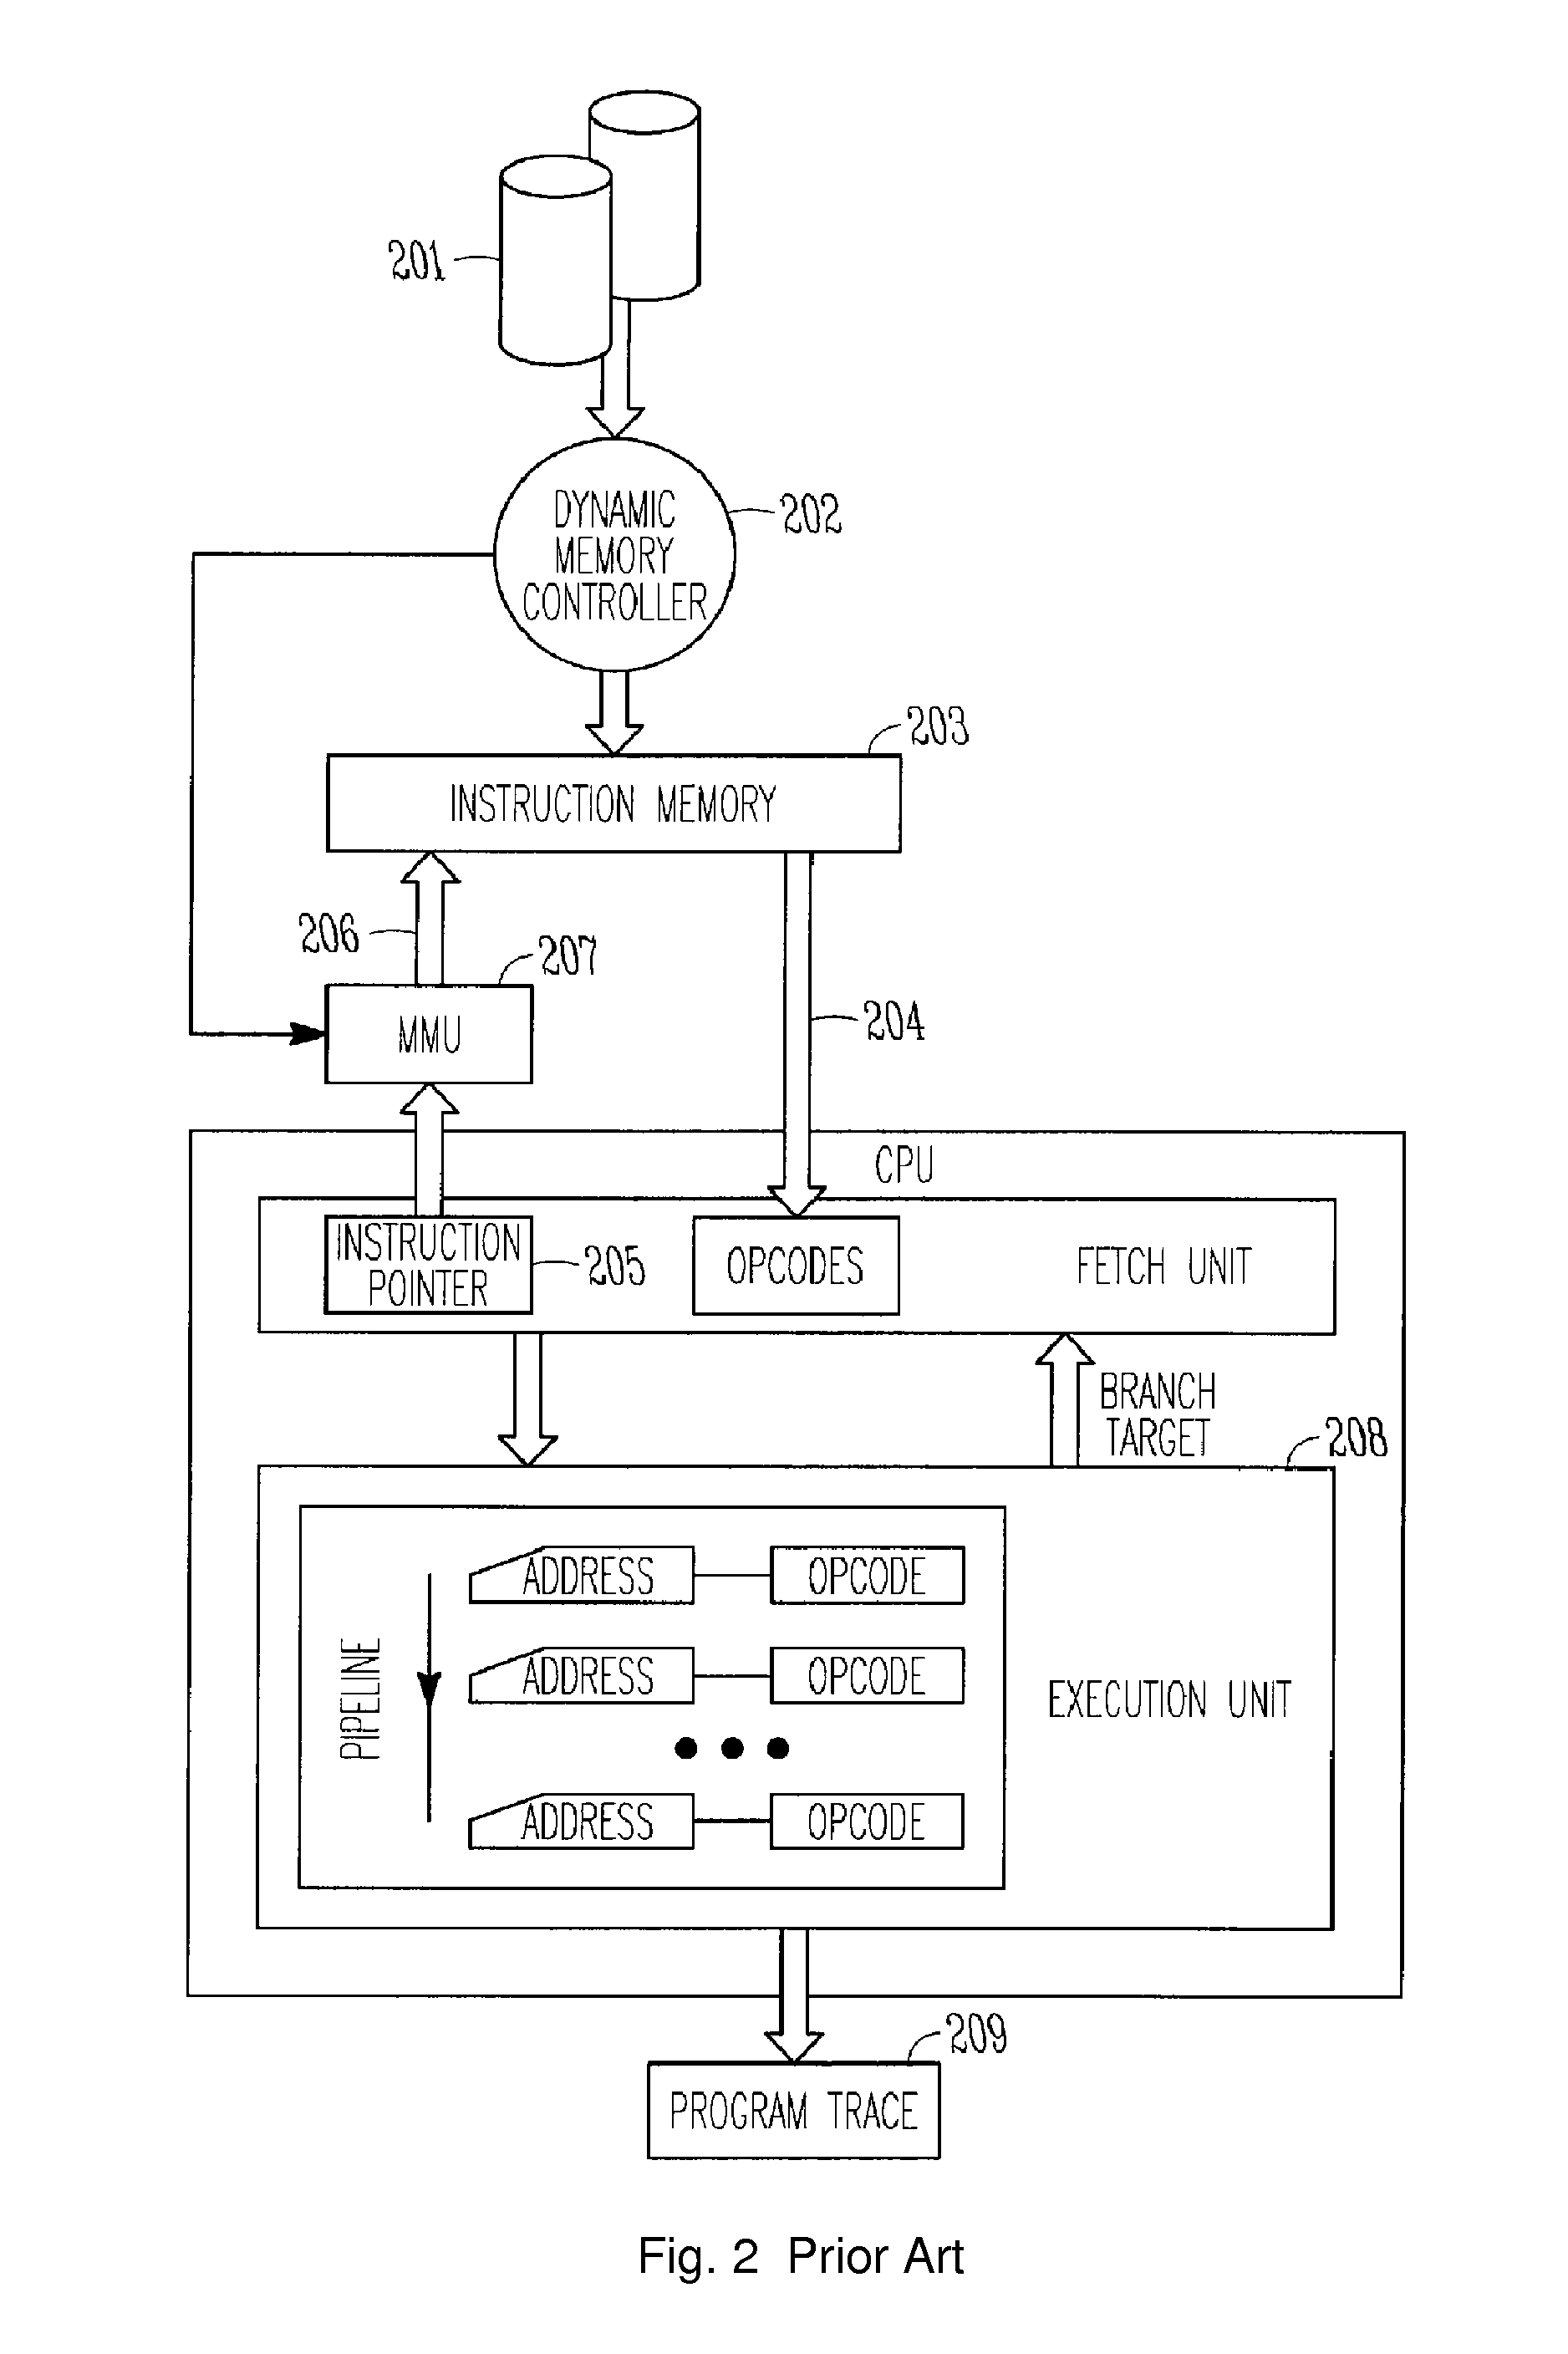 System and method for validating program execution at run-time